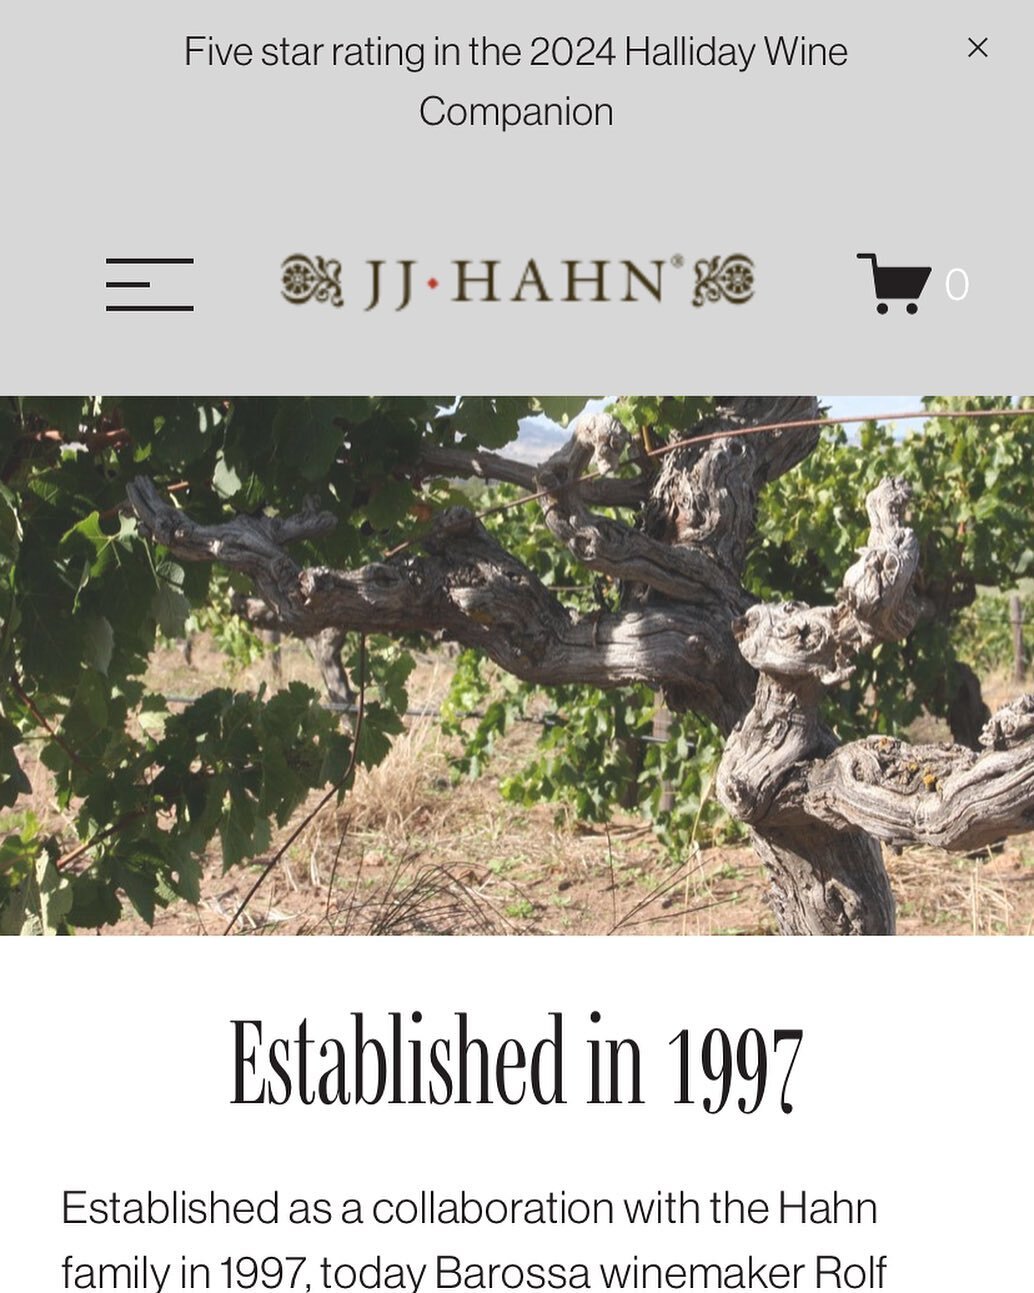 New website launched, free shipping domestically for minimum six pack orders. www.jjhahnwineco.com.au/shop